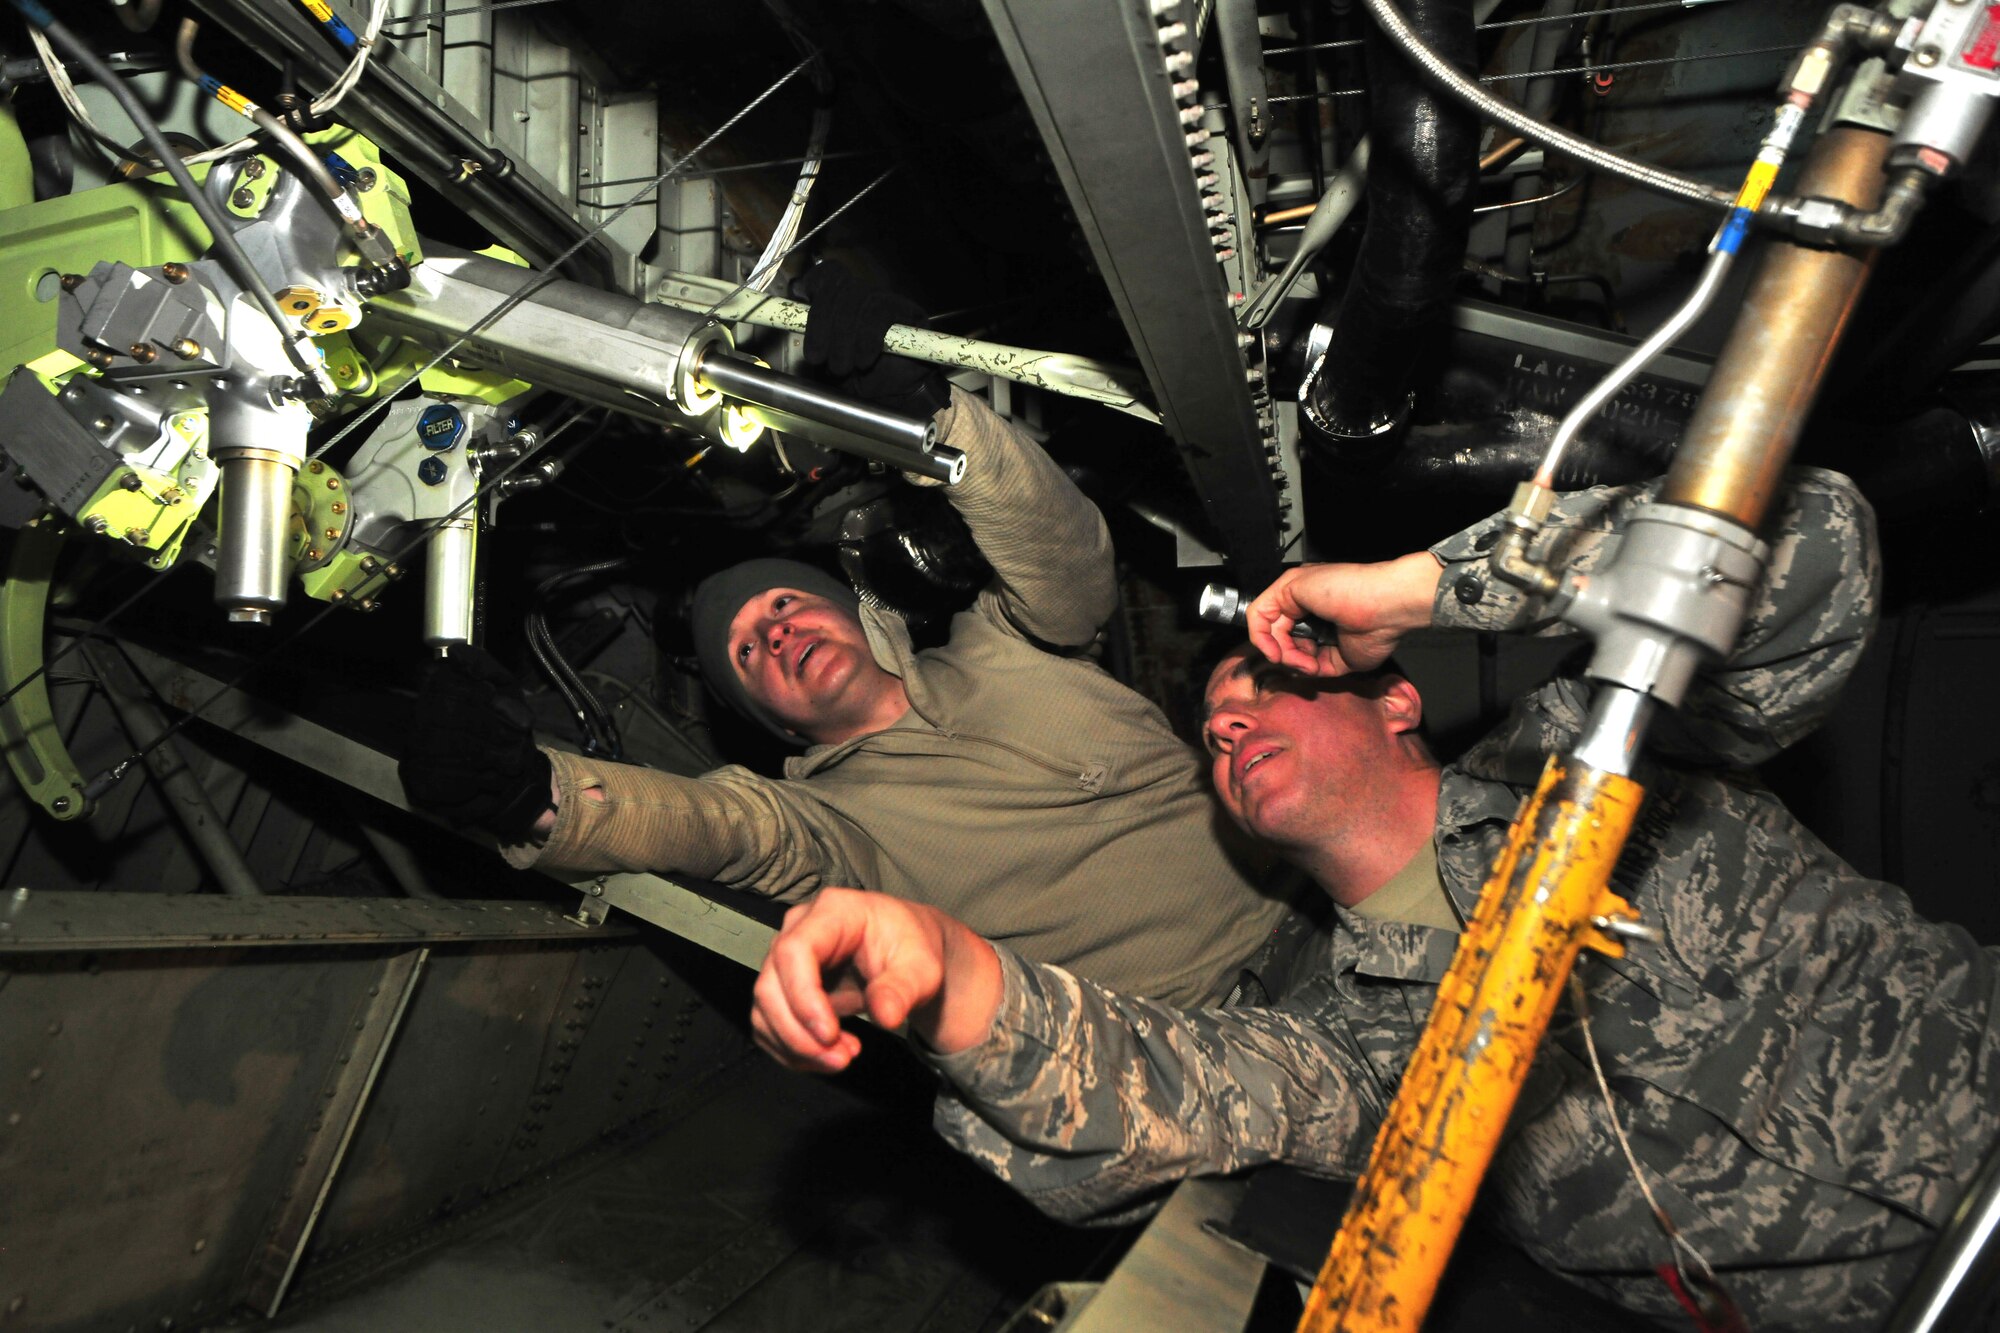 Senior Airman David Dower and Airman 1st Class Andrew Machalik of the 166th Maintenance Squadron, Delaware Air National Guard perform elevator boost pack maintenance on a C-130 Hercules transport aircraft at the New Castle ANG Base, Del., April 10, 2015. The aircraft will be flown April 11 during Operation Cyclone, a Delaware National Guard joint training exercise when Airmen and Soldiers will respond to a simulated tornado that has swept through New Castle County. Army Black Hawk helicopters will evacuate simulated wounded personnel to the ANG Base, with patients loaded onto C-130s for aerial evacuation. Separate from the exercise, on April 12, six C-130s will participate in the largest formation flown by the wing since departing for Southwest Asia in March 2003 to support Operation Iraqi Freedom. (U.S. Air National Guard photo by Staff Sgt. John Michaels)